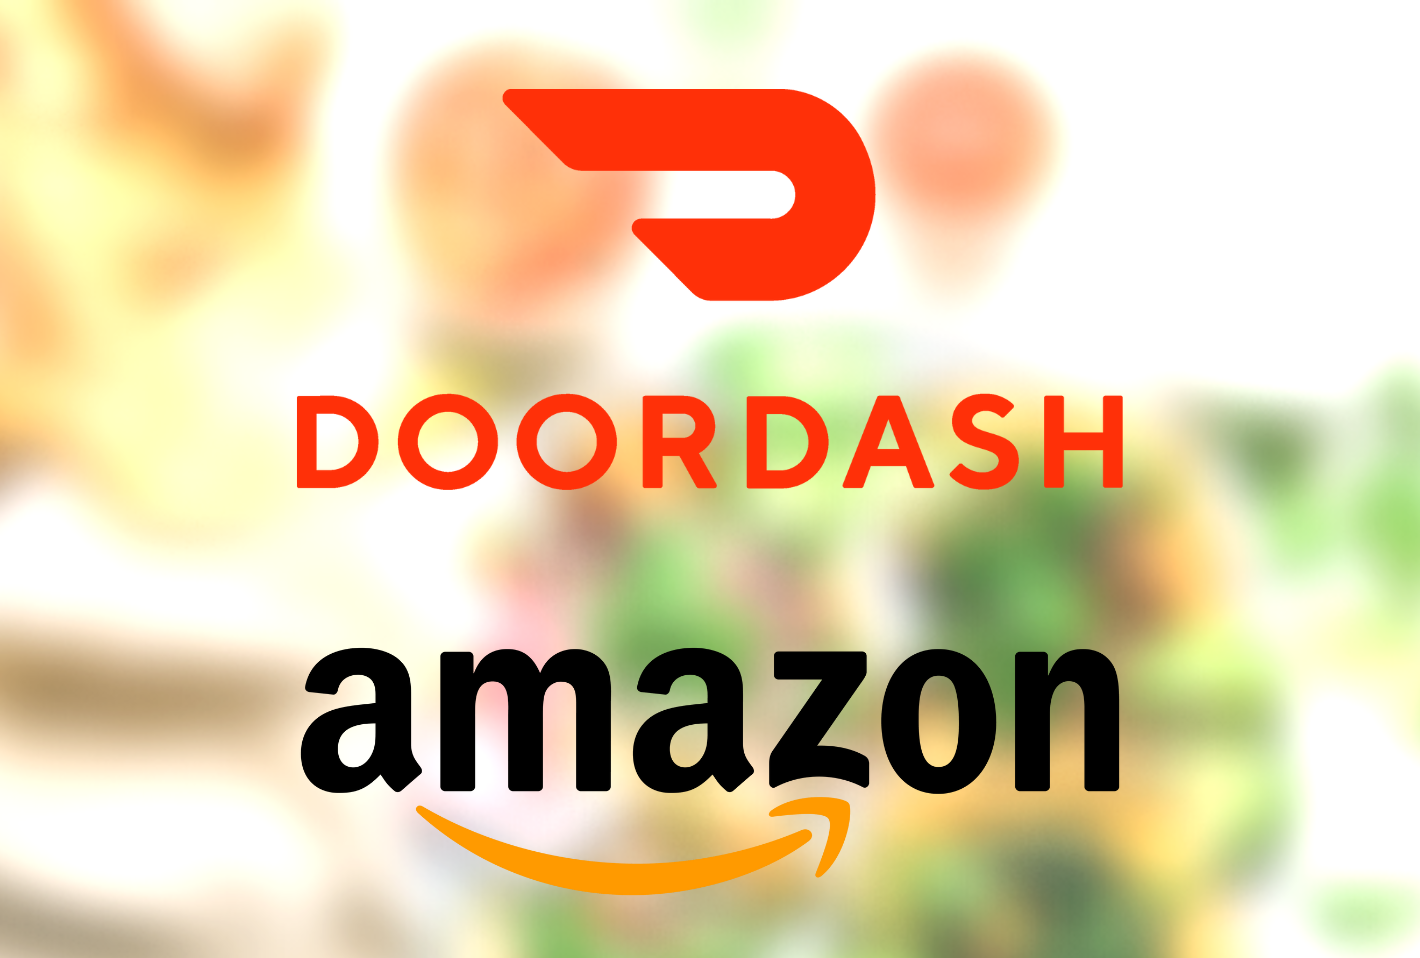 Amazon Canada and DoorDash announce free, one-year DashPass membership for Prime members